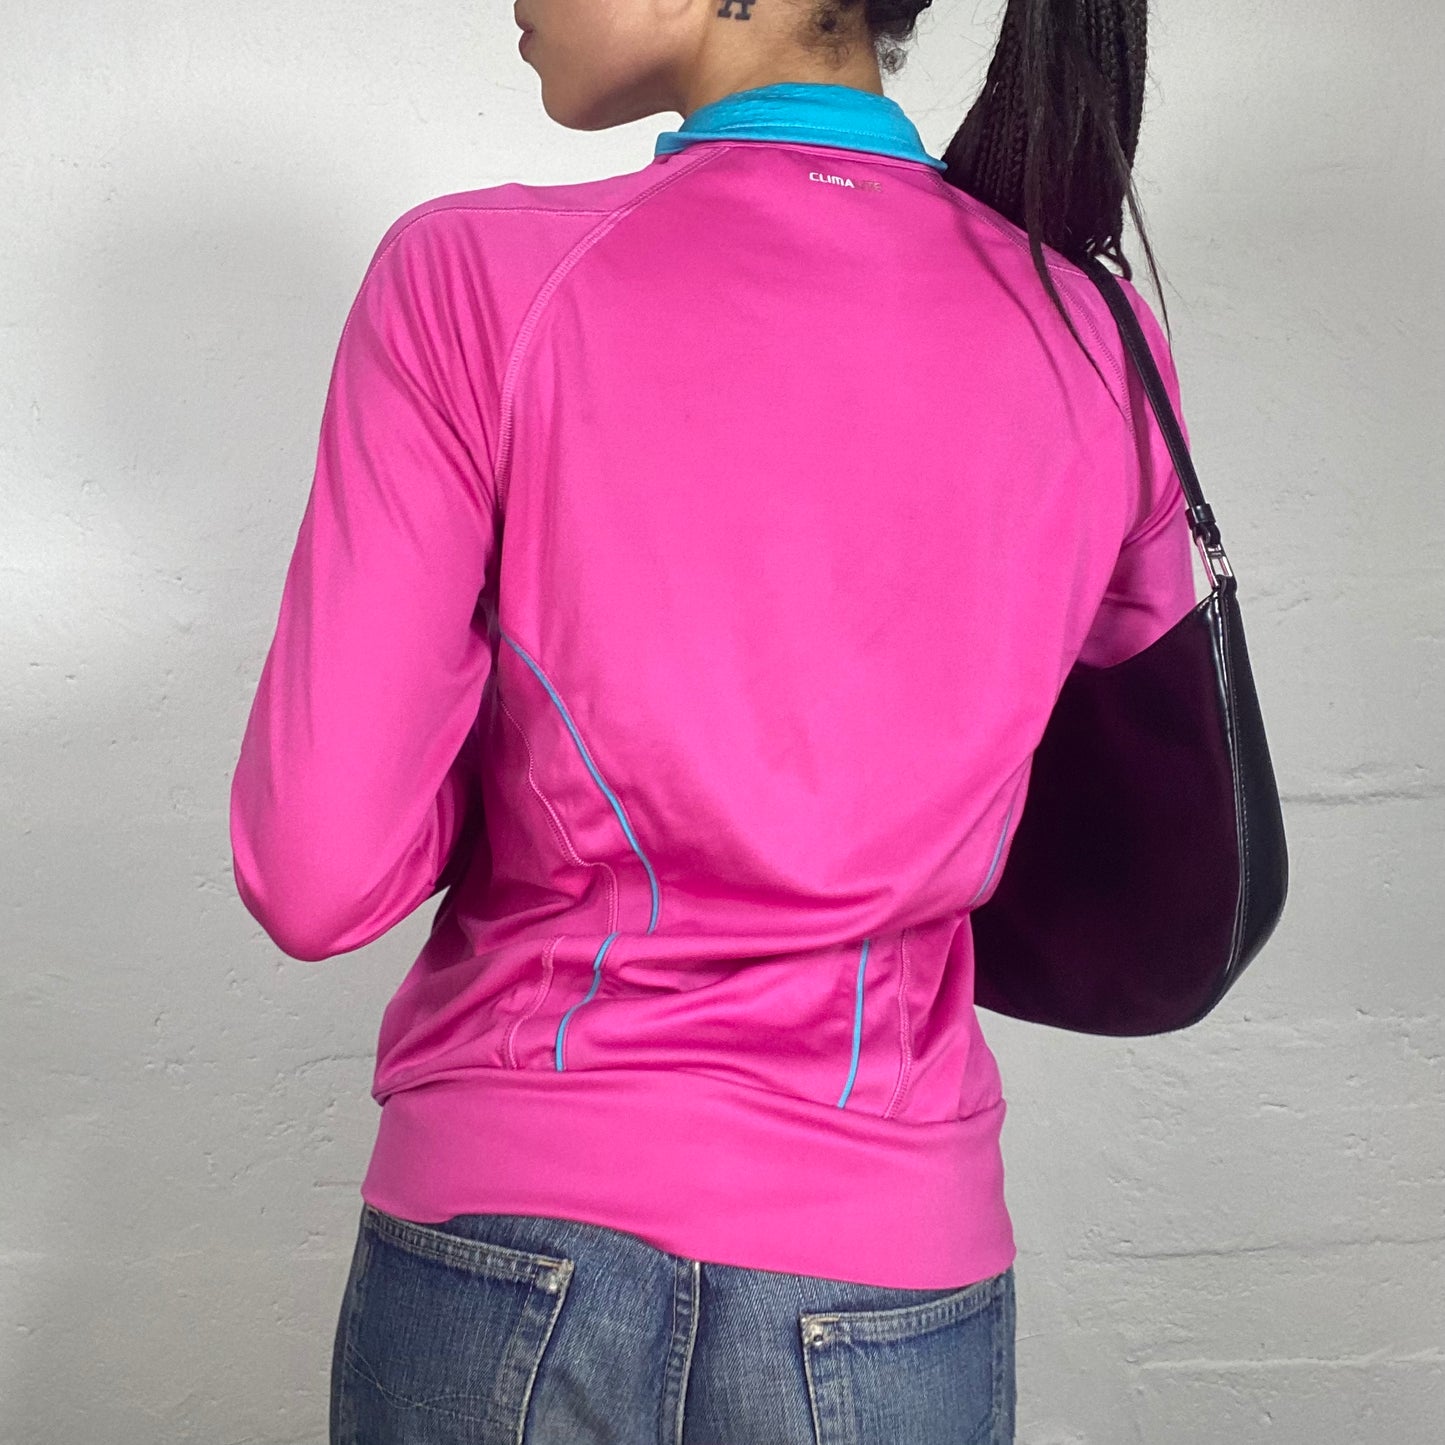 Vintage 90's Sporty Neon Pink Zip Up Pullover with Blue Stripes (S)